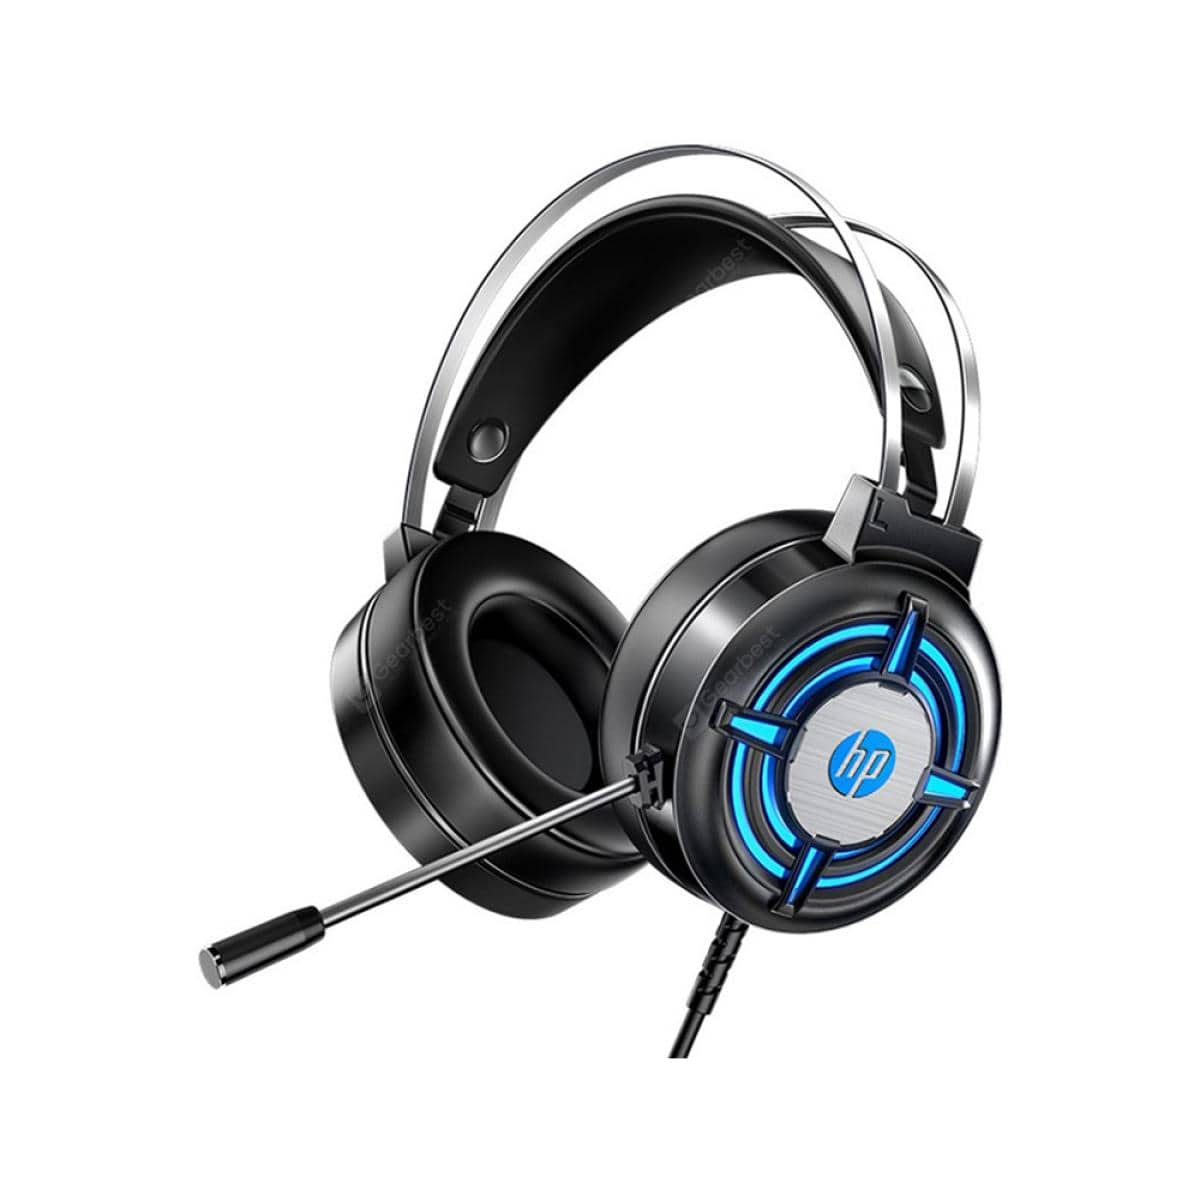 HP accesories HP H120G RGB Wired Gaming Headset